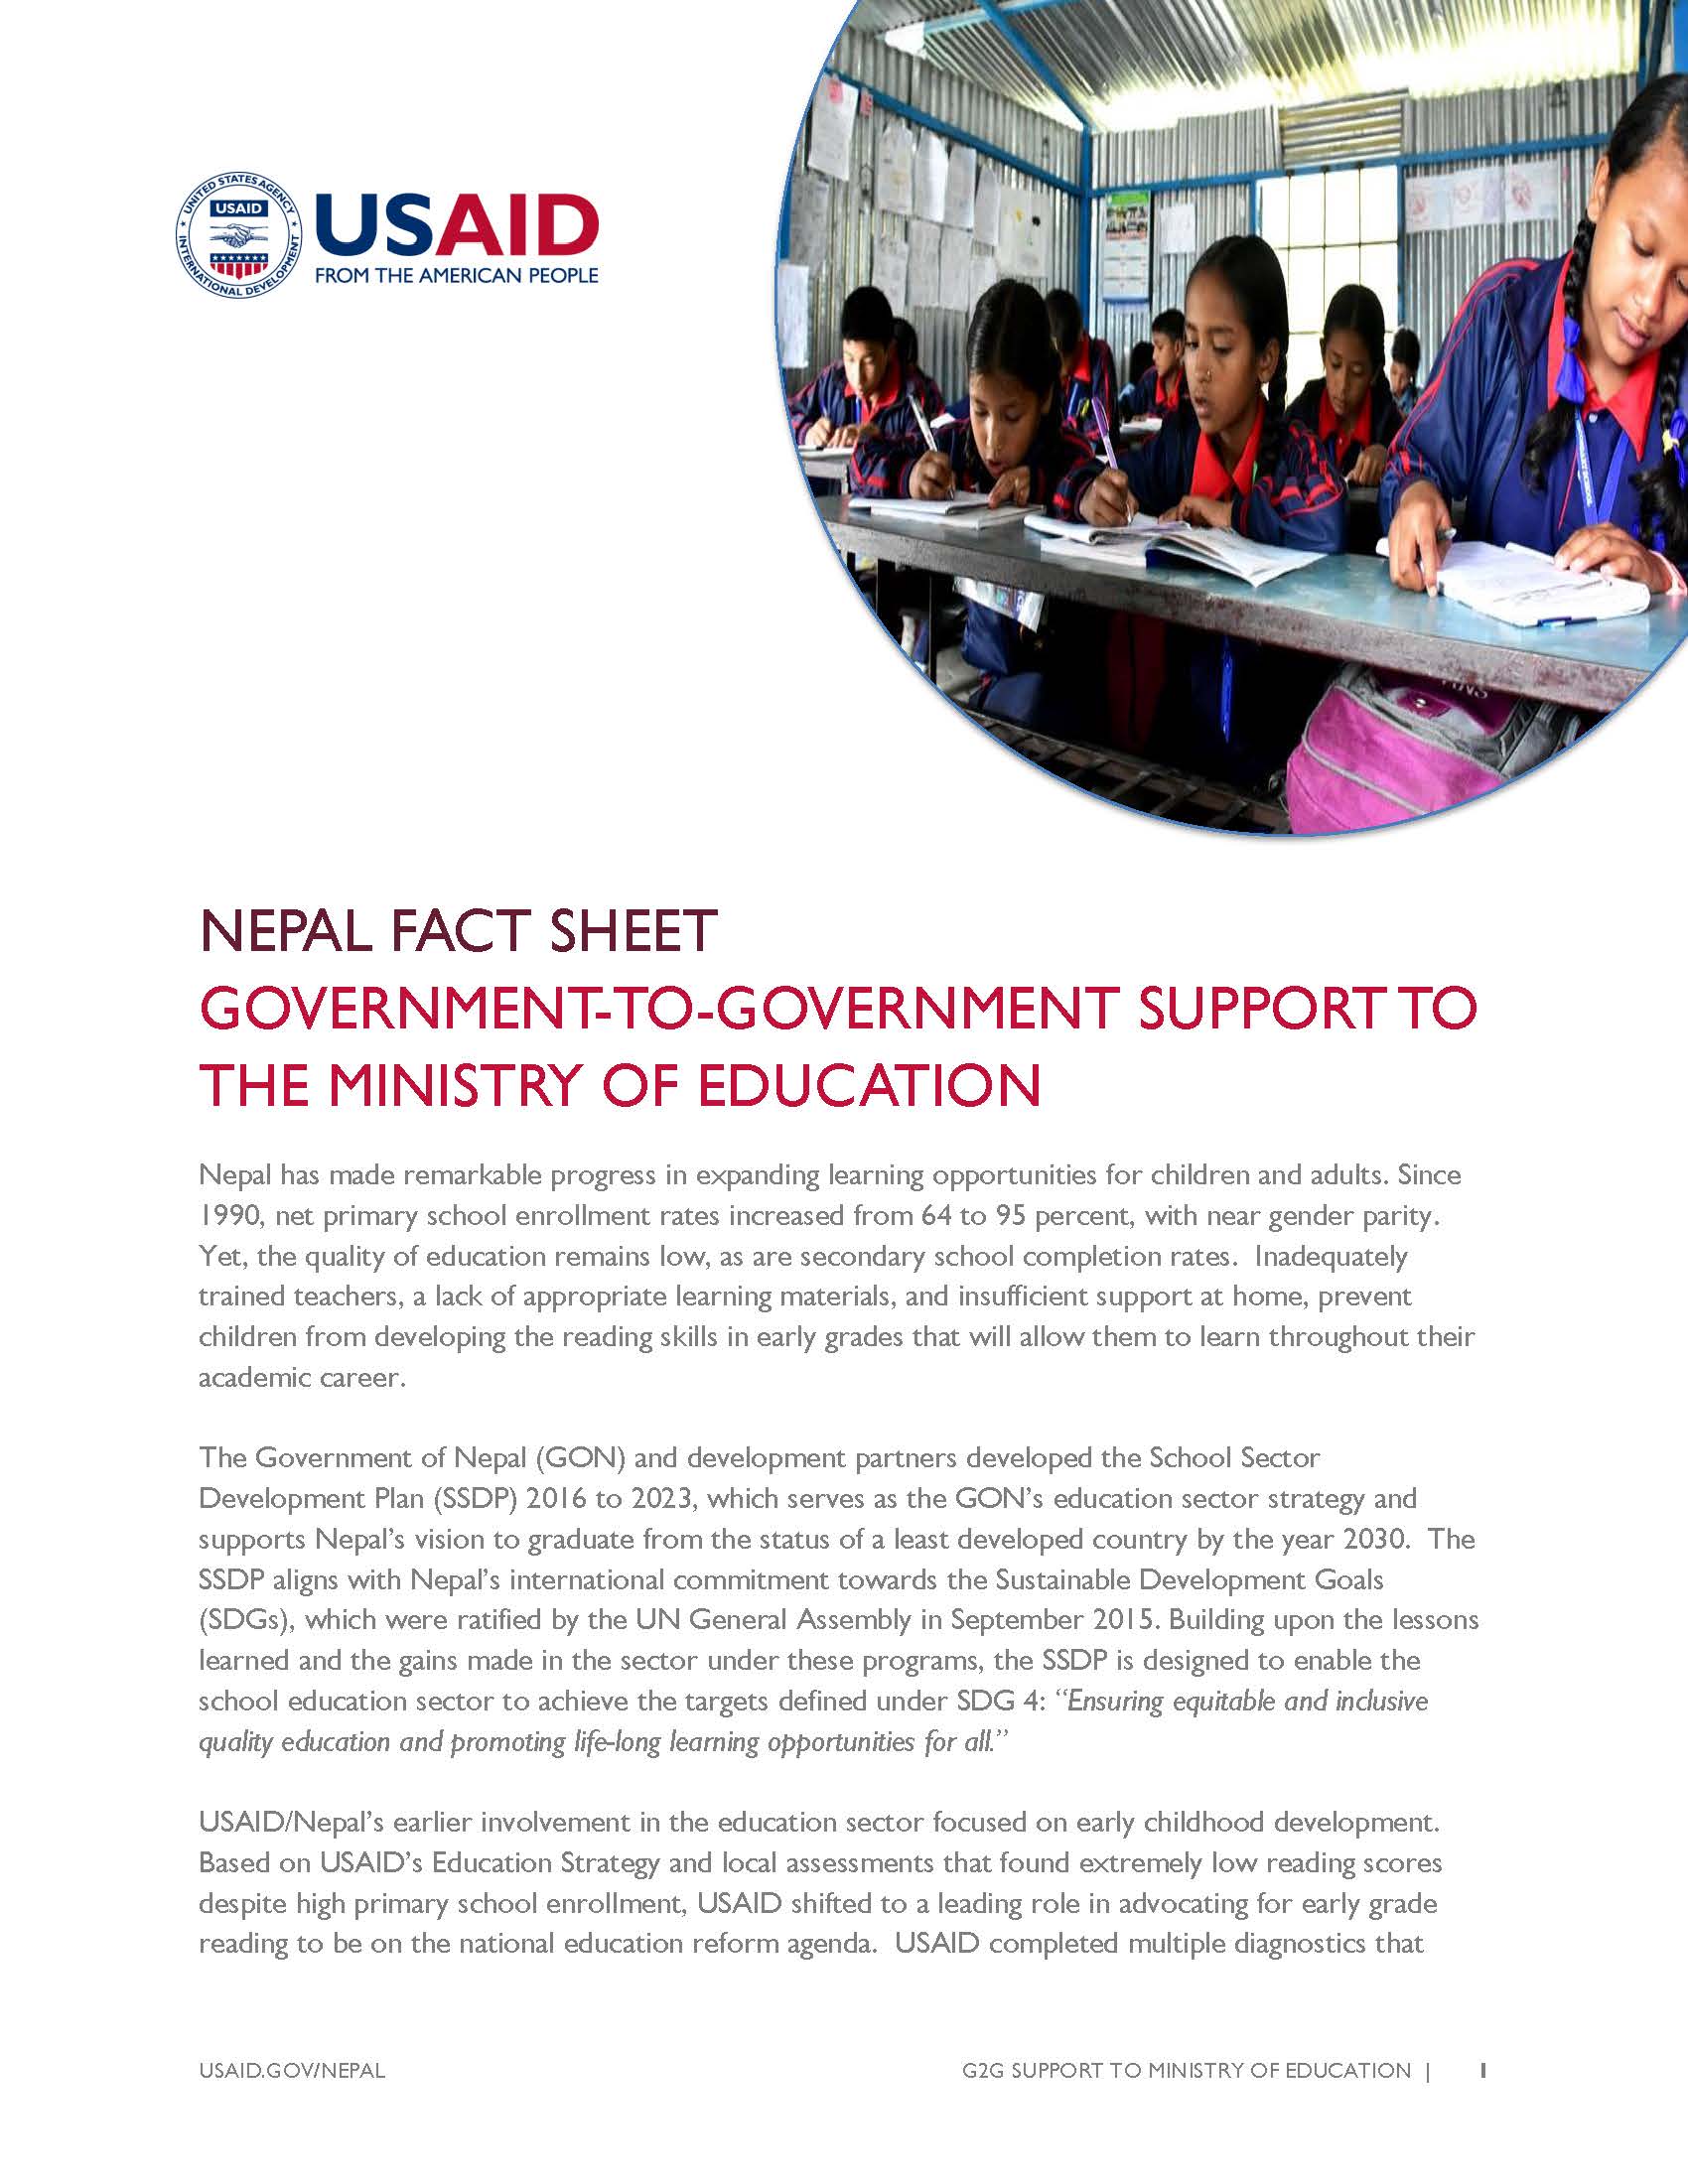 Fact Sheet: GOVERNMENT-TO-GOVERNMENT SUPPORT TO THE MINISTRY OF EDUCATION